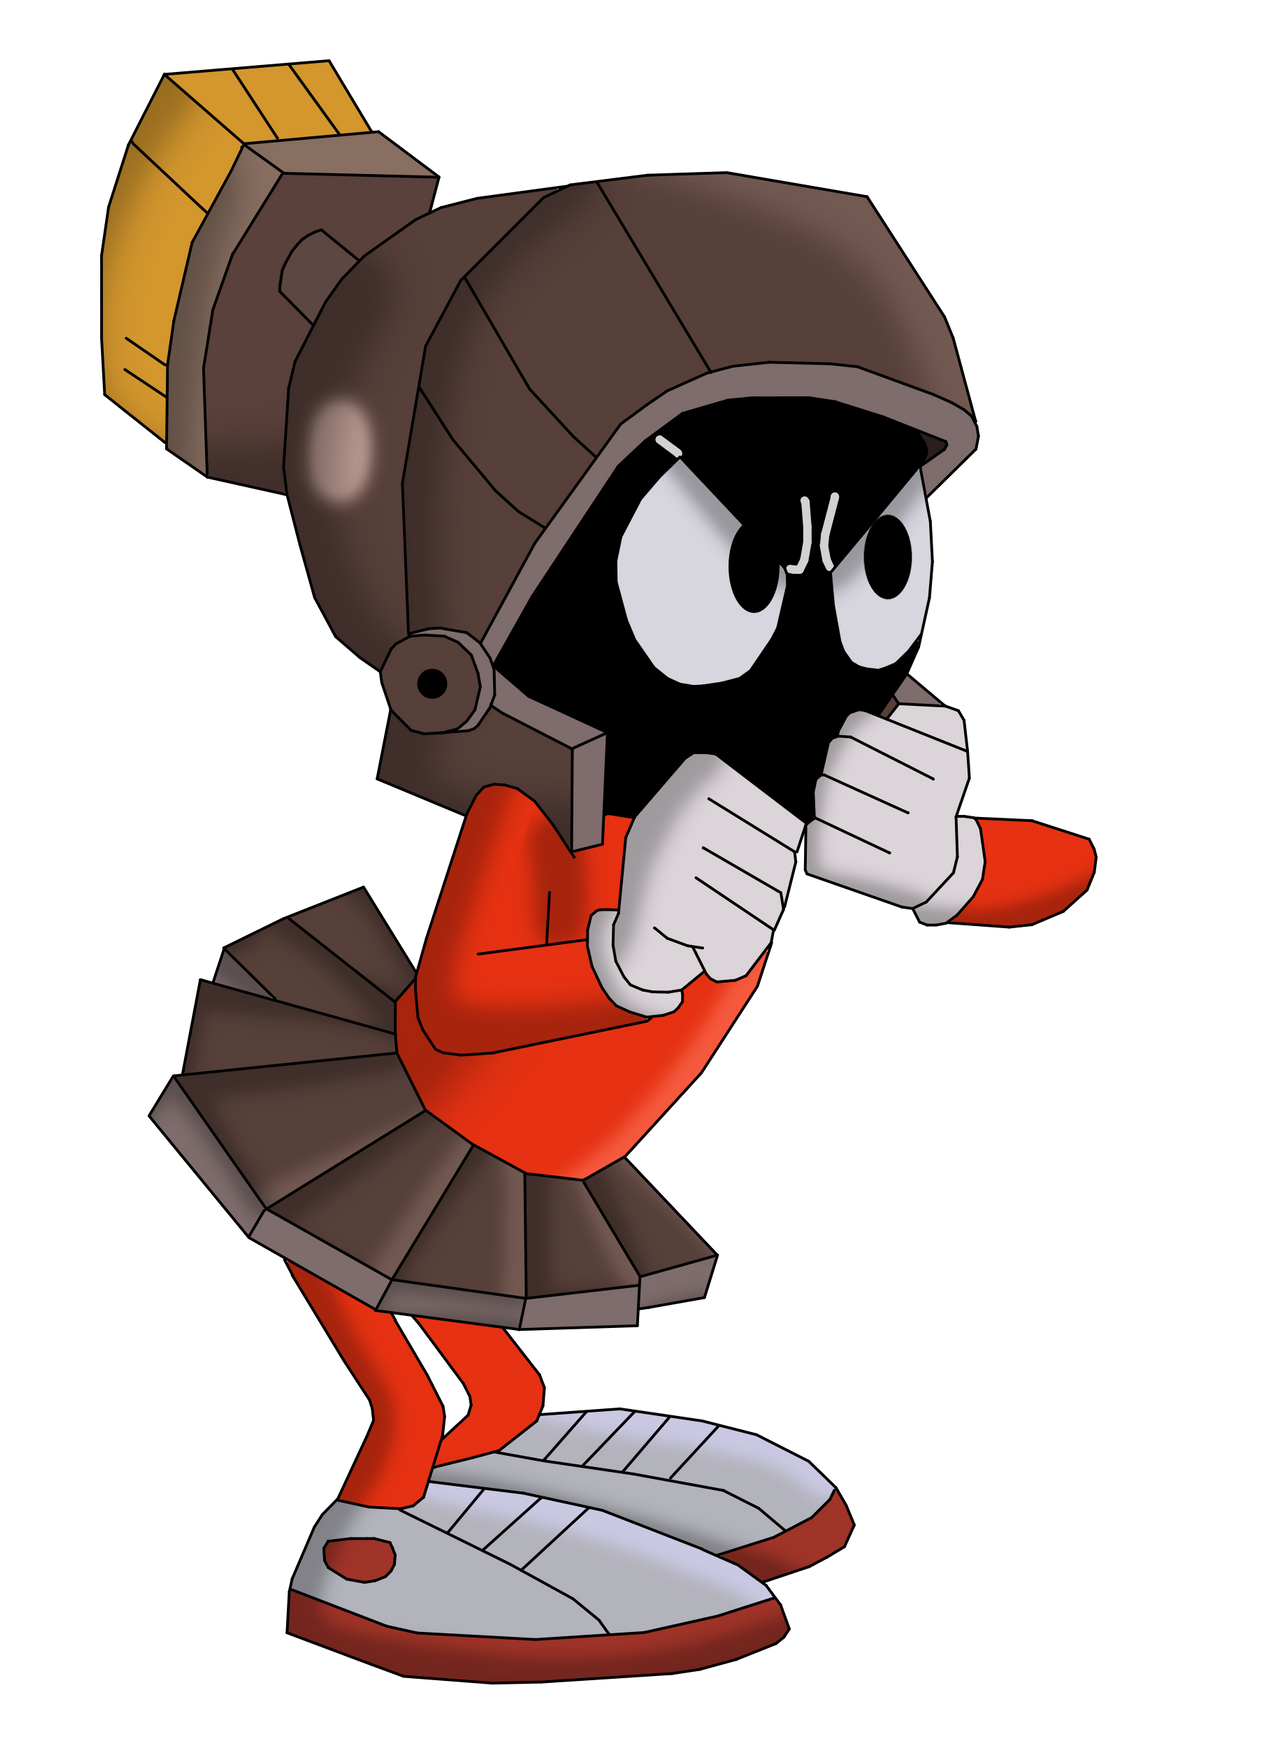 Marvin The Martian 1980 angry! by CaptainEdwardTeague on DeviantArt